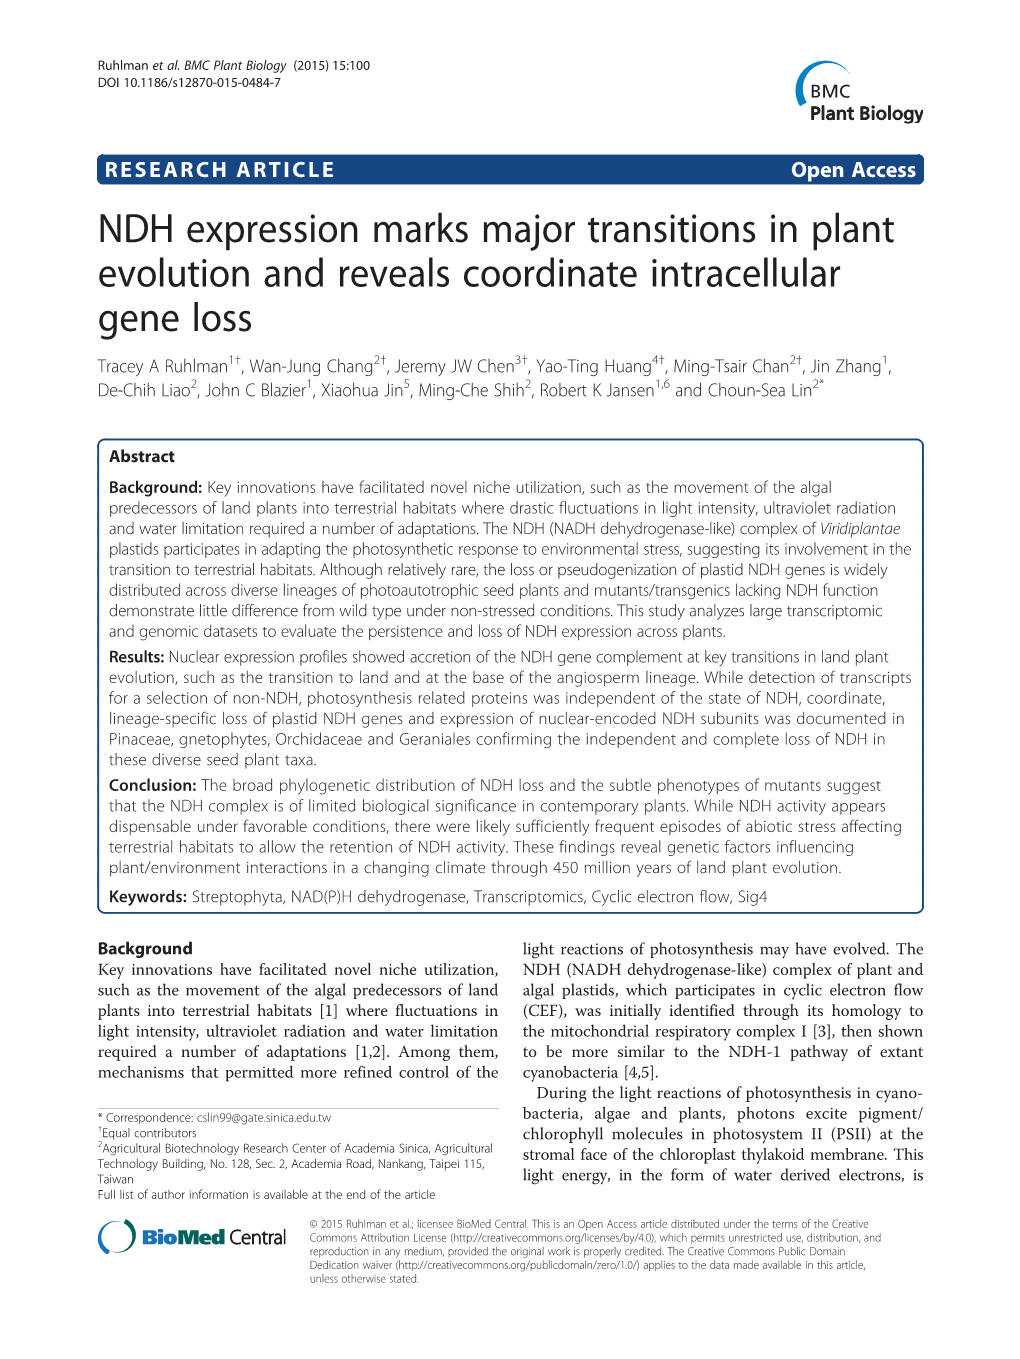 NDH Expression Marks Major Transitions in Plant Evolution and Reveals Coordinate Intracellular Gene Loss